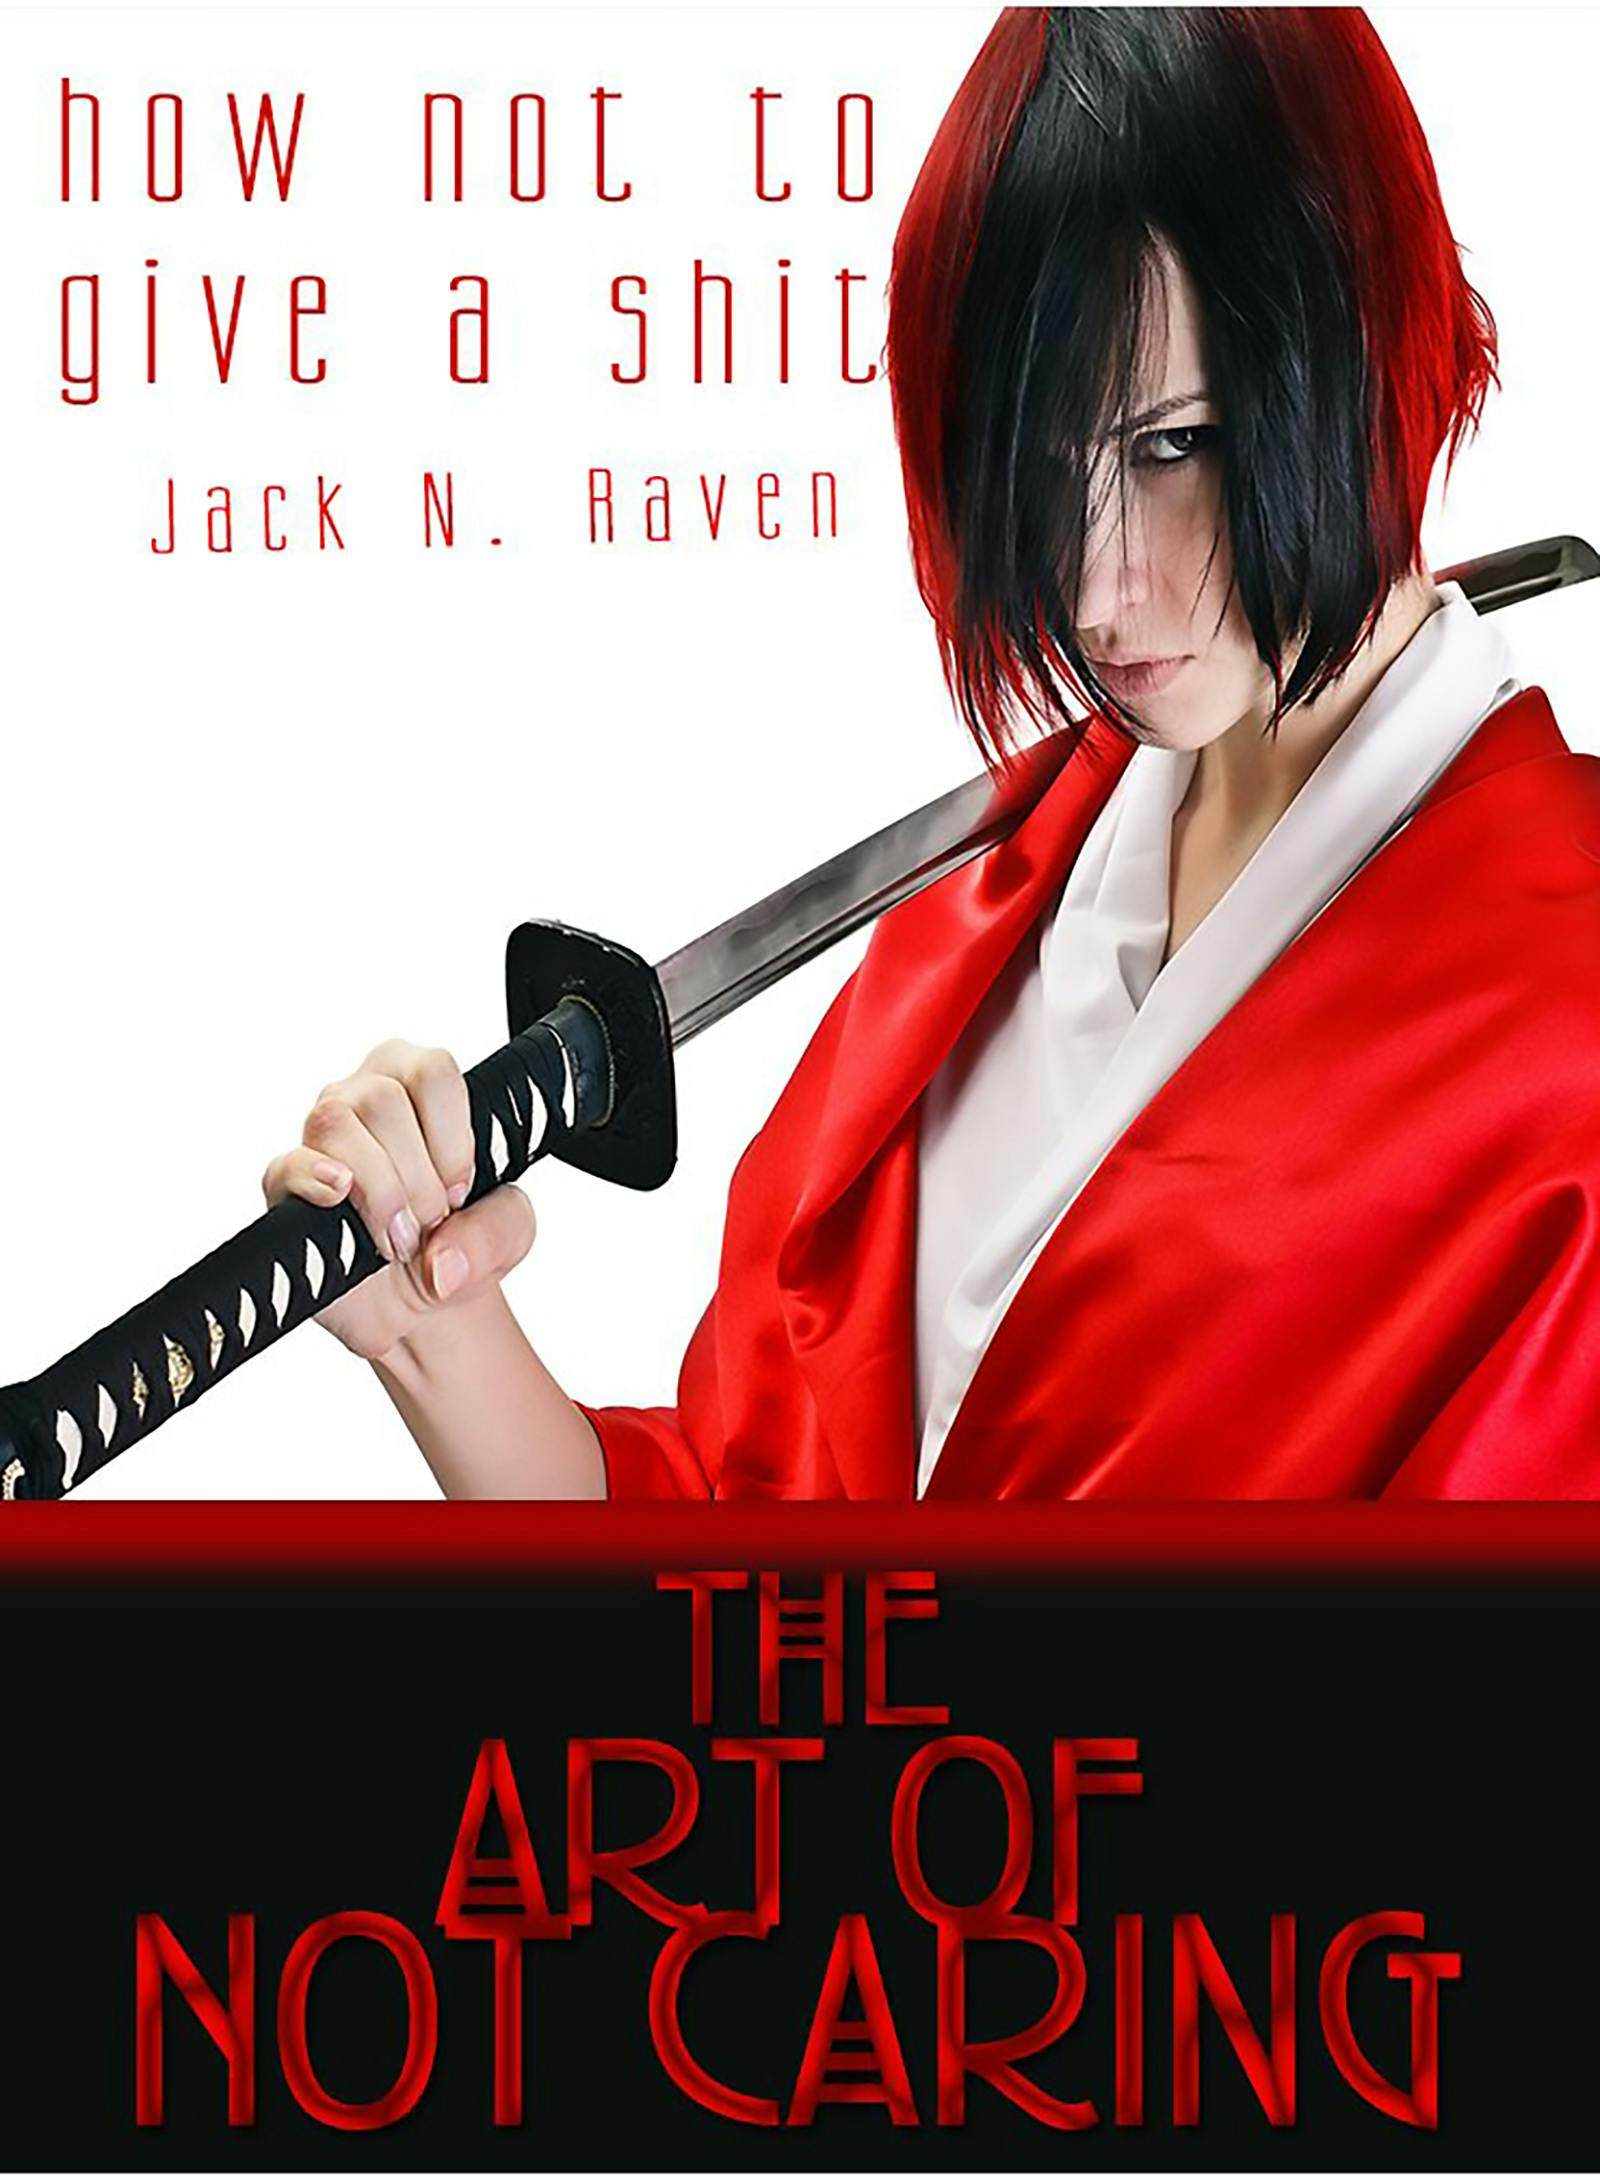 How Not To Give a Shit!: The Art of Not Caring - Jack N. Raven